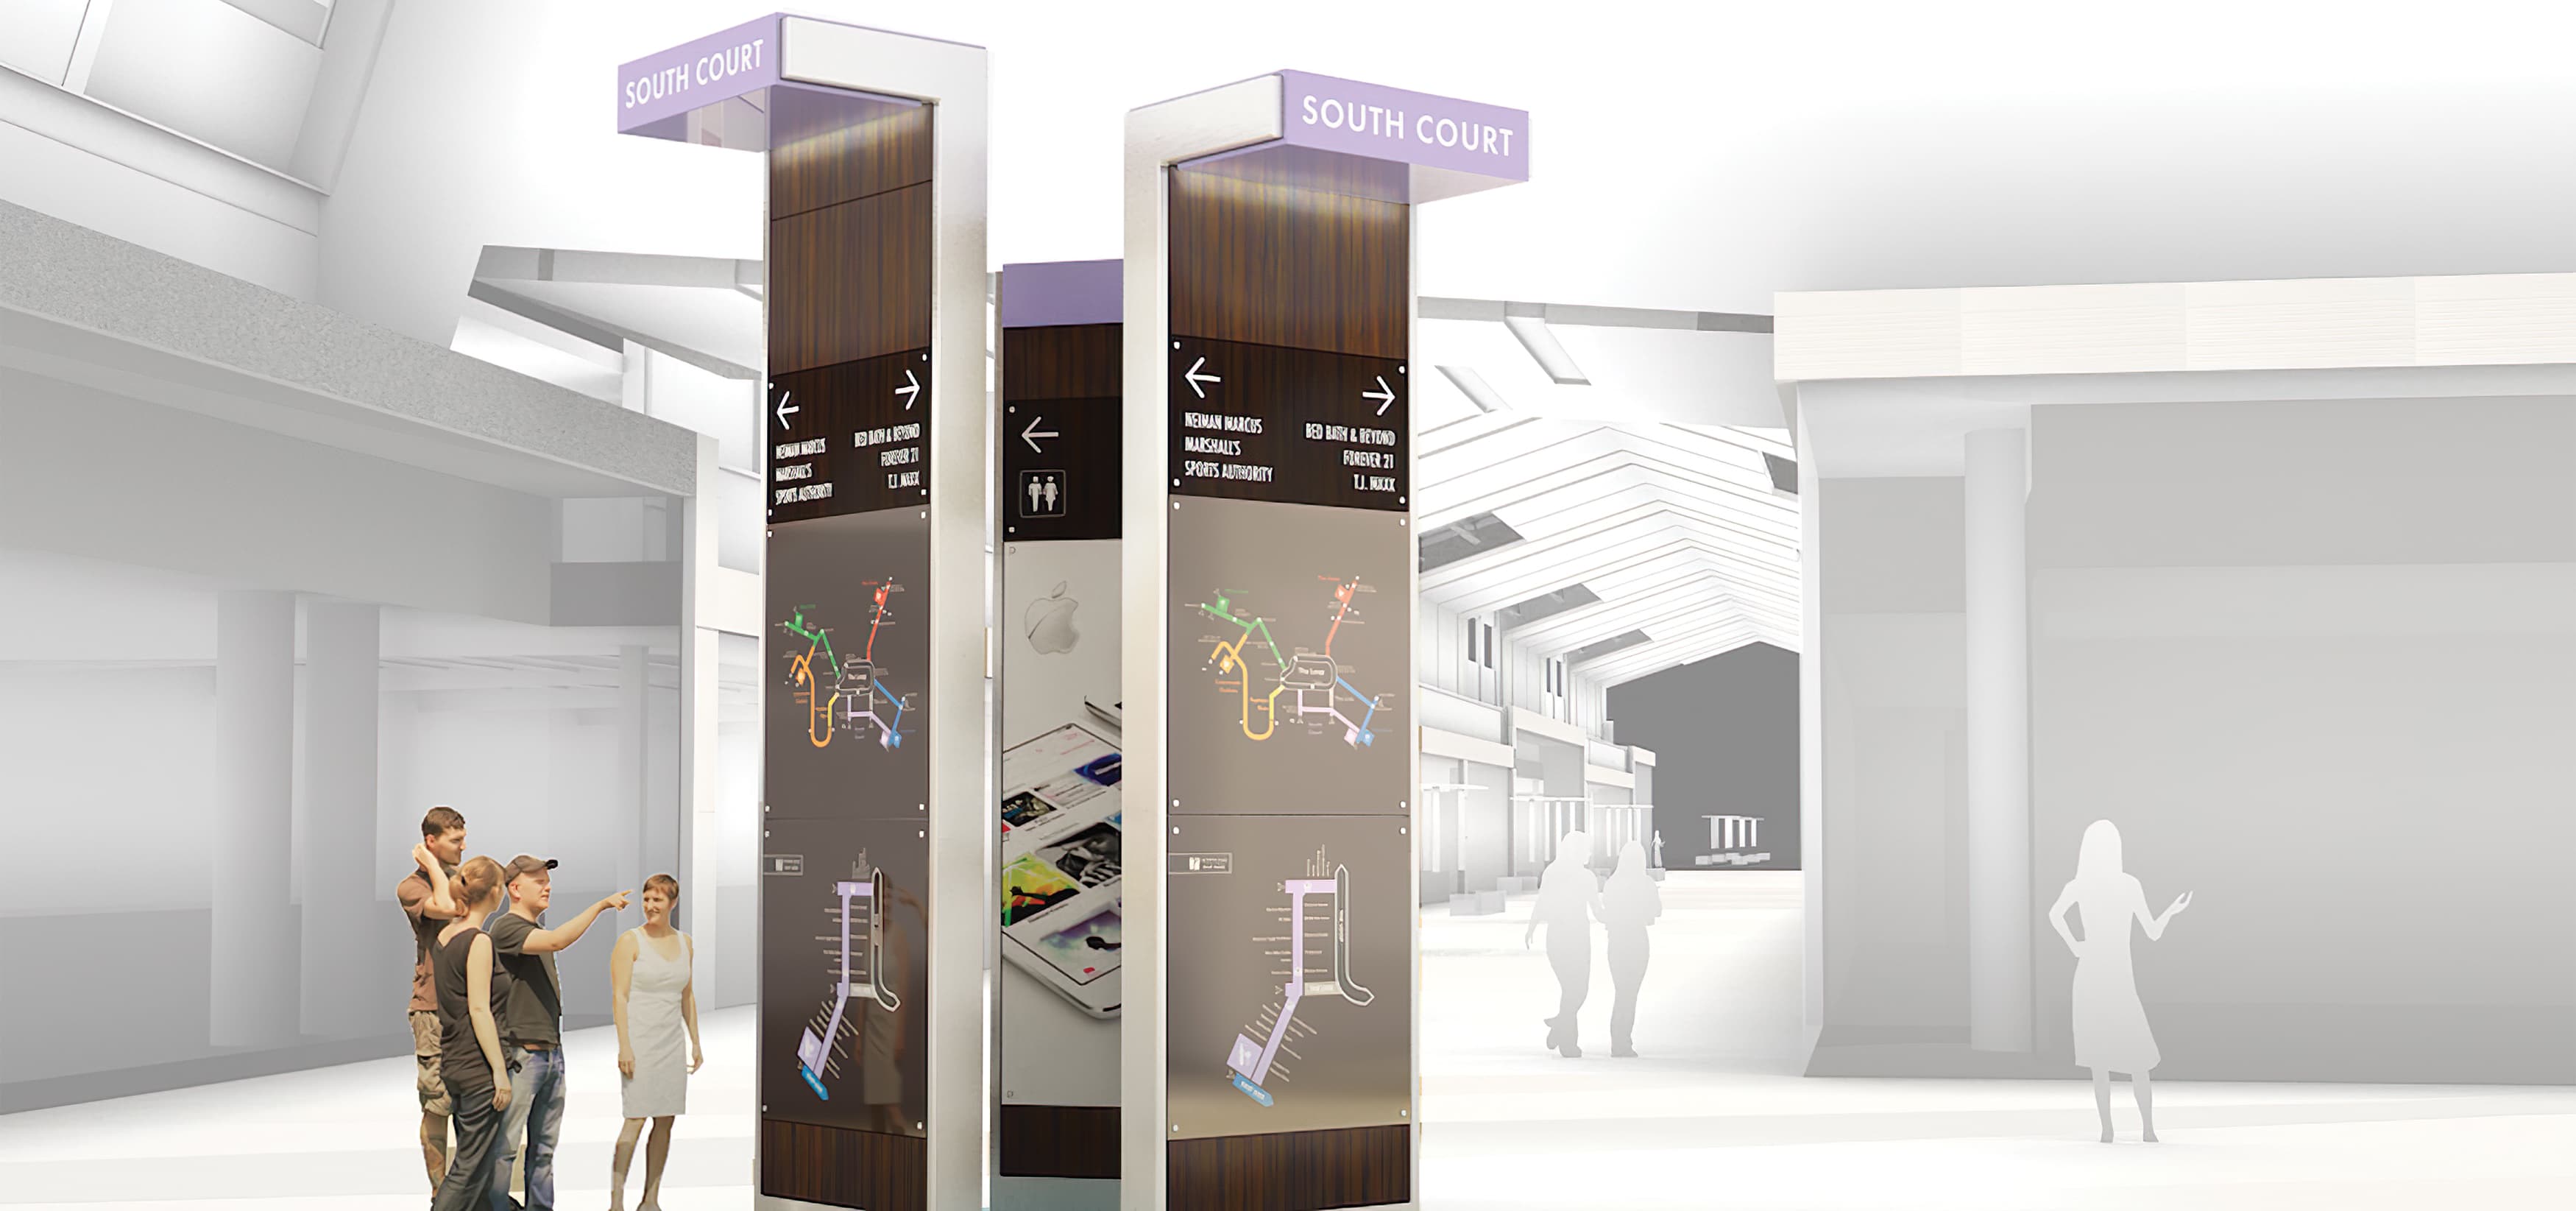 RSM Design worked to develop wayfinding signage, environmental graphics, and placemaking elements for Sawgrass Mills, a Simon Center located in Sunrise, Florida. Pedestrian Directory.